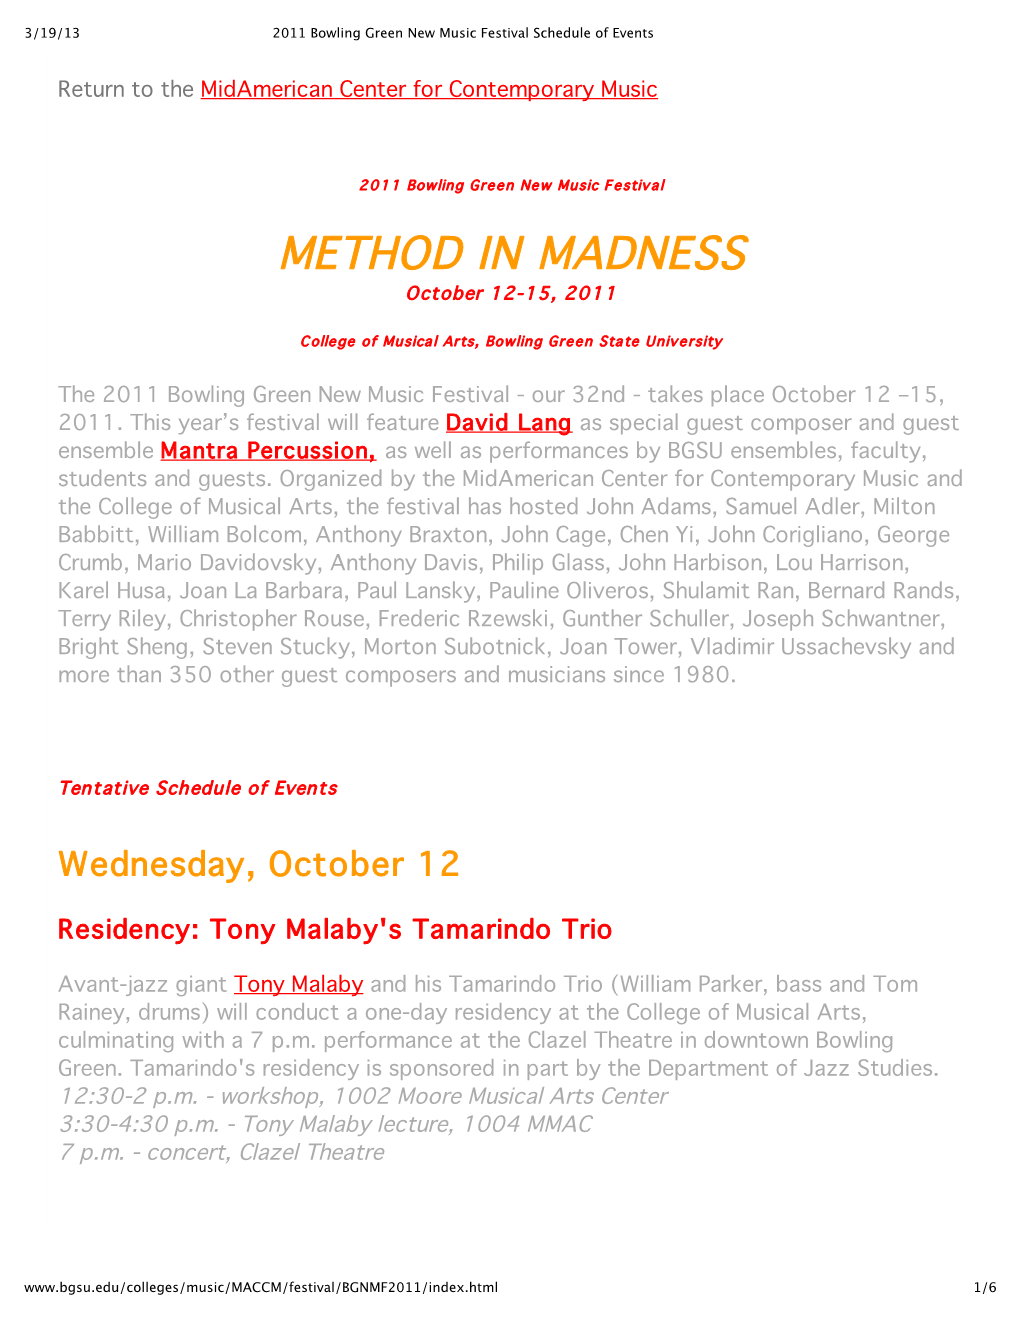 METHOD in MADNESS October 12-15, 2011